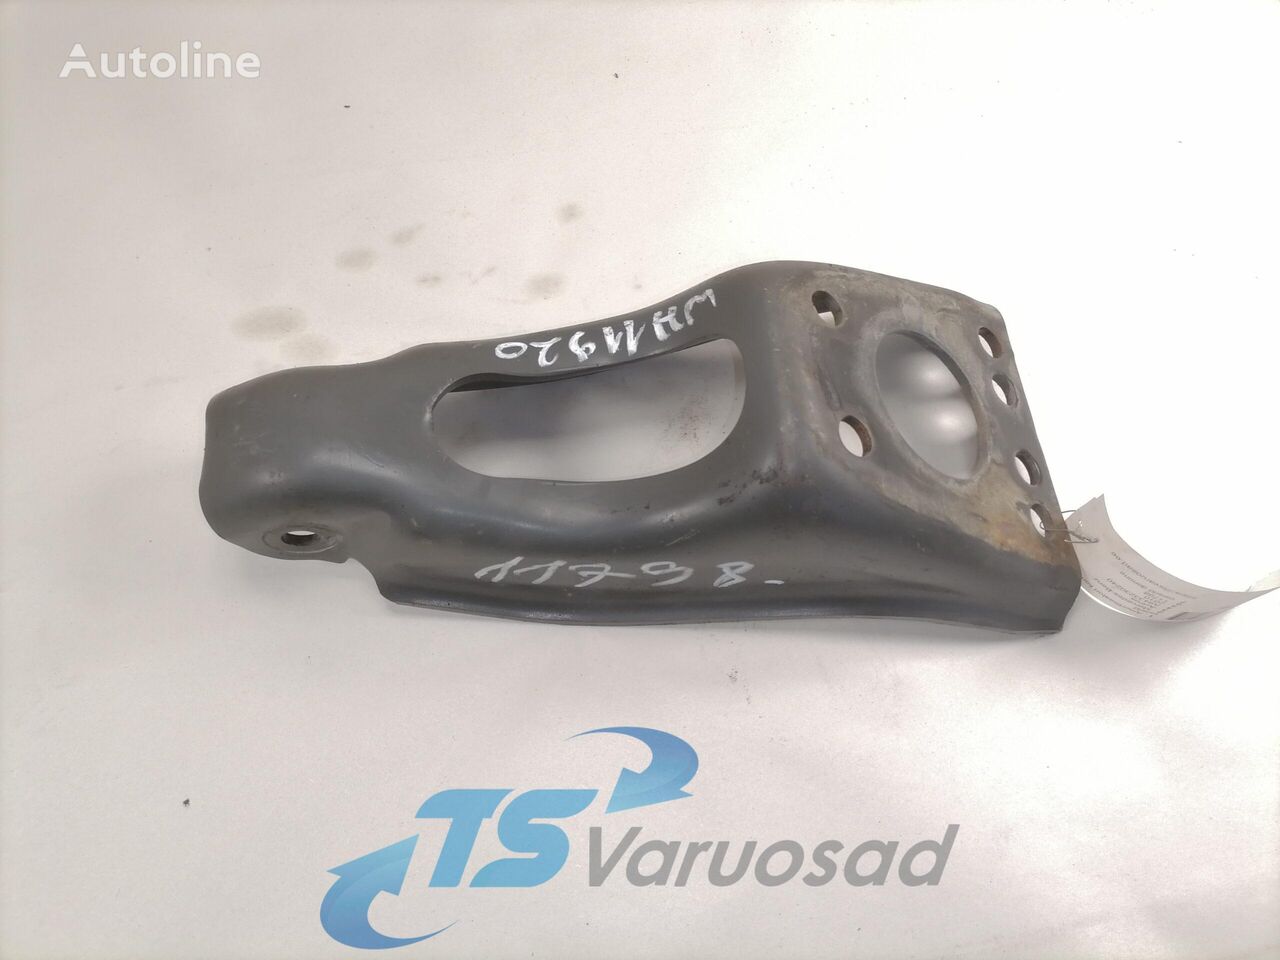 Ahock absorber mounting Mercedes-Benz Ahock absorber mounting 9433230240 paredzēts Mercedes-Benz Actros vilcēja